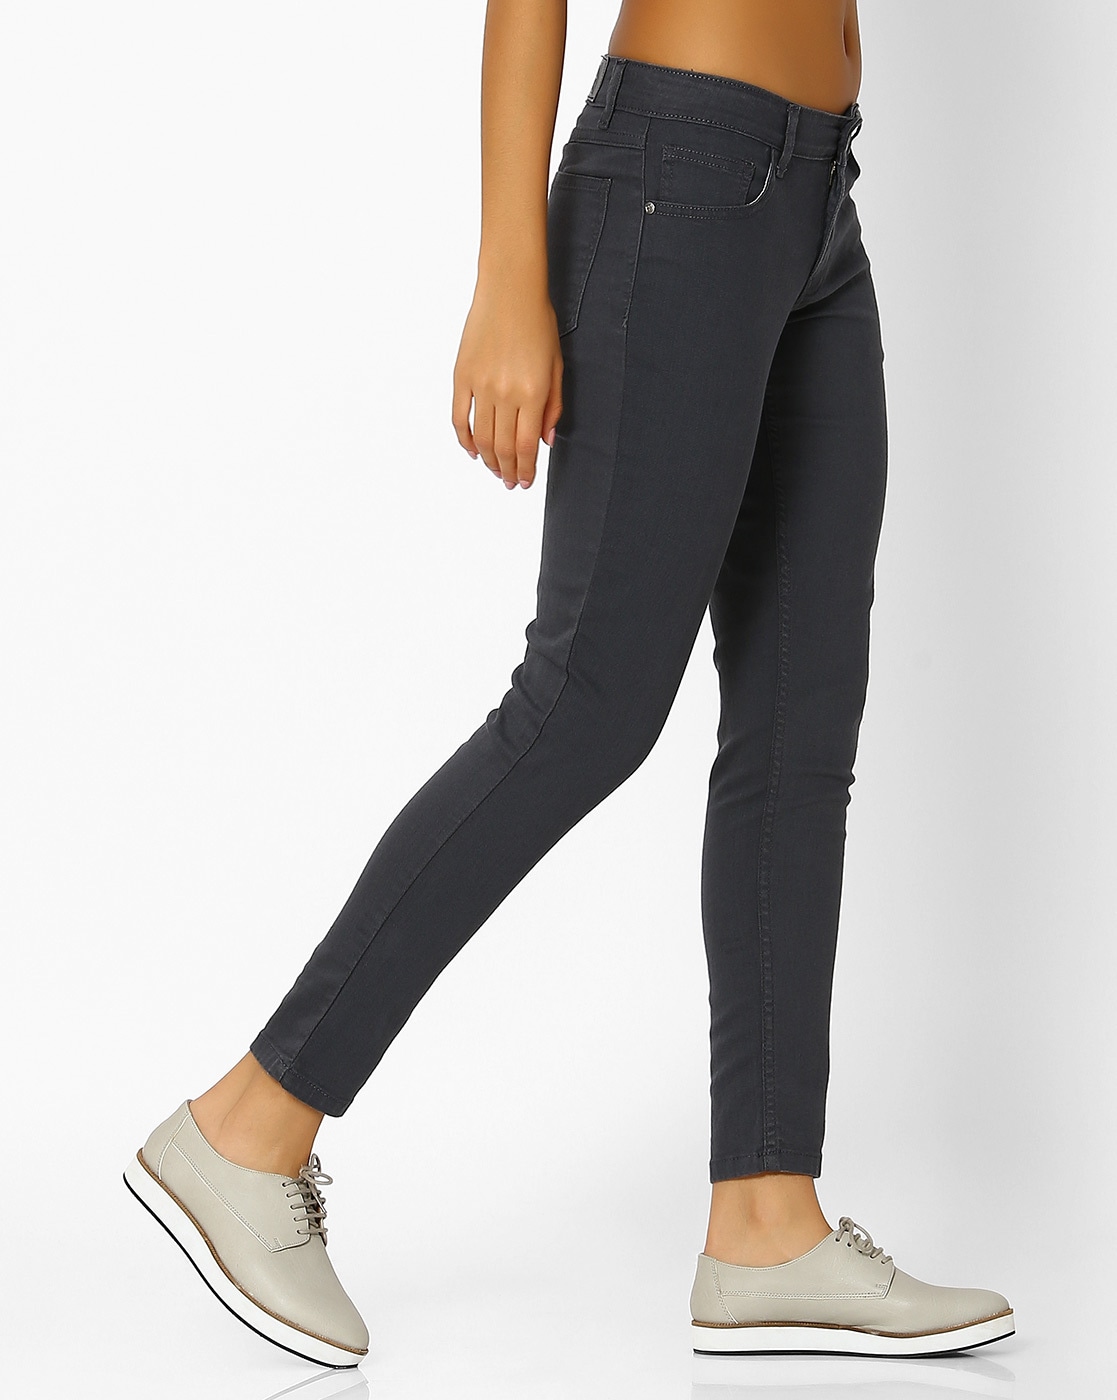 Buy Cropped Skinny Jeans Online at Best Prices in India - JioMart.